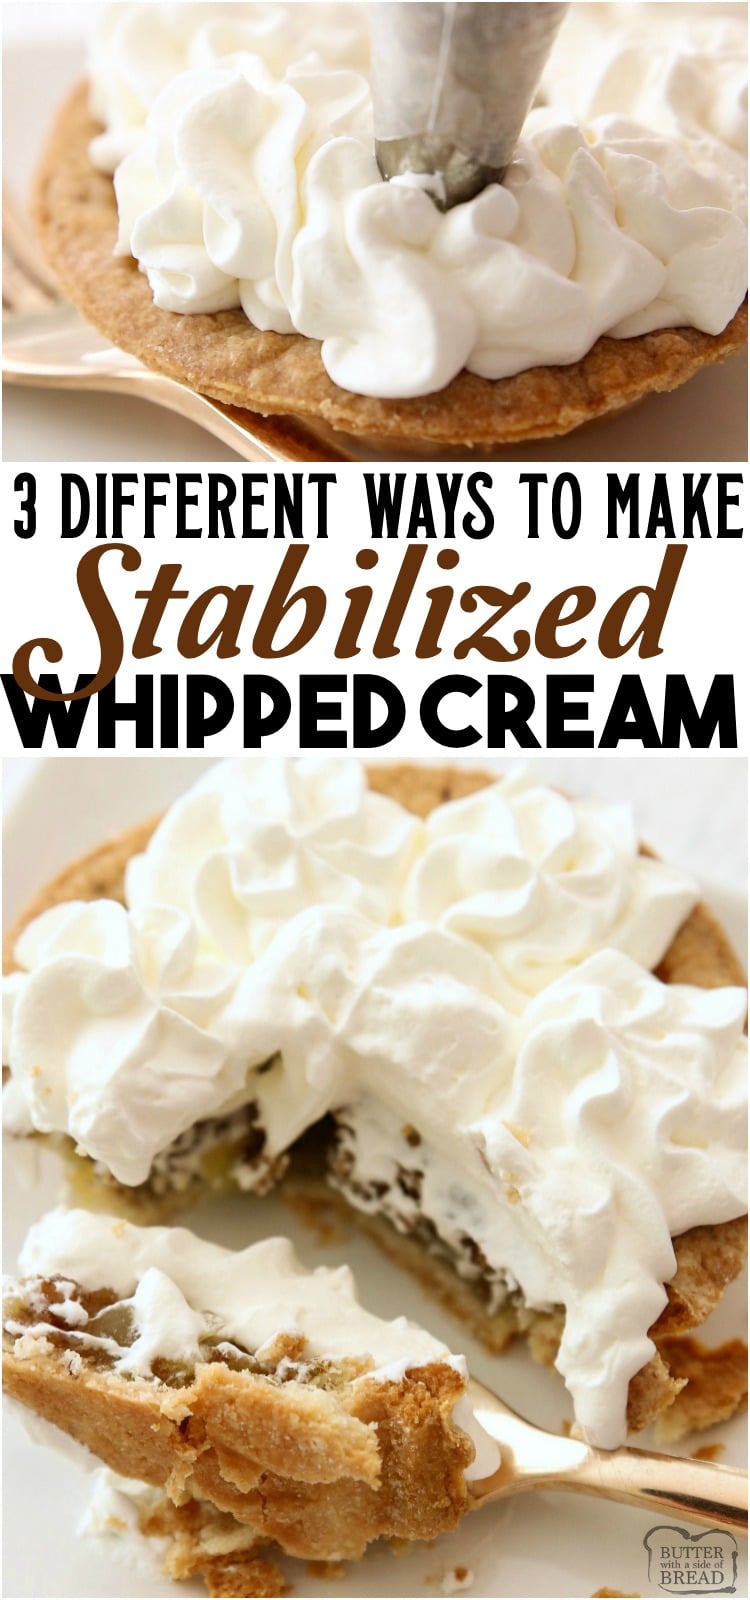 How to Make Stabilized Whipped Cream~ 3 different EASY ways to make stabilized cream! #whippedcream #stabilized #howtomakewhippedcream #cream #recipe from BUTTER WITH A SIDE OF BREAD